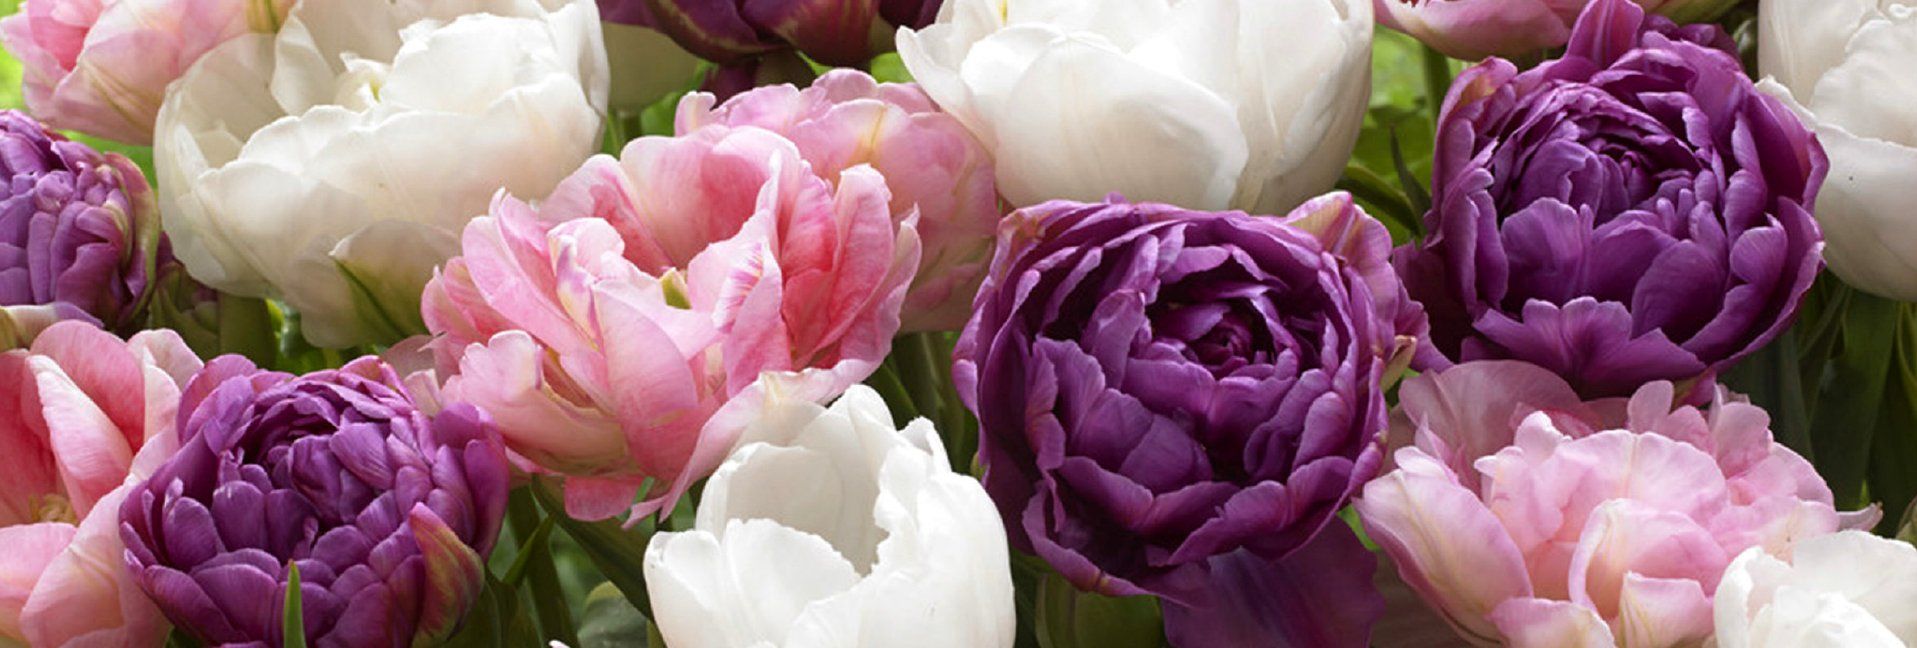 Plant Bulbs Now for Outrageous Spring Blooms